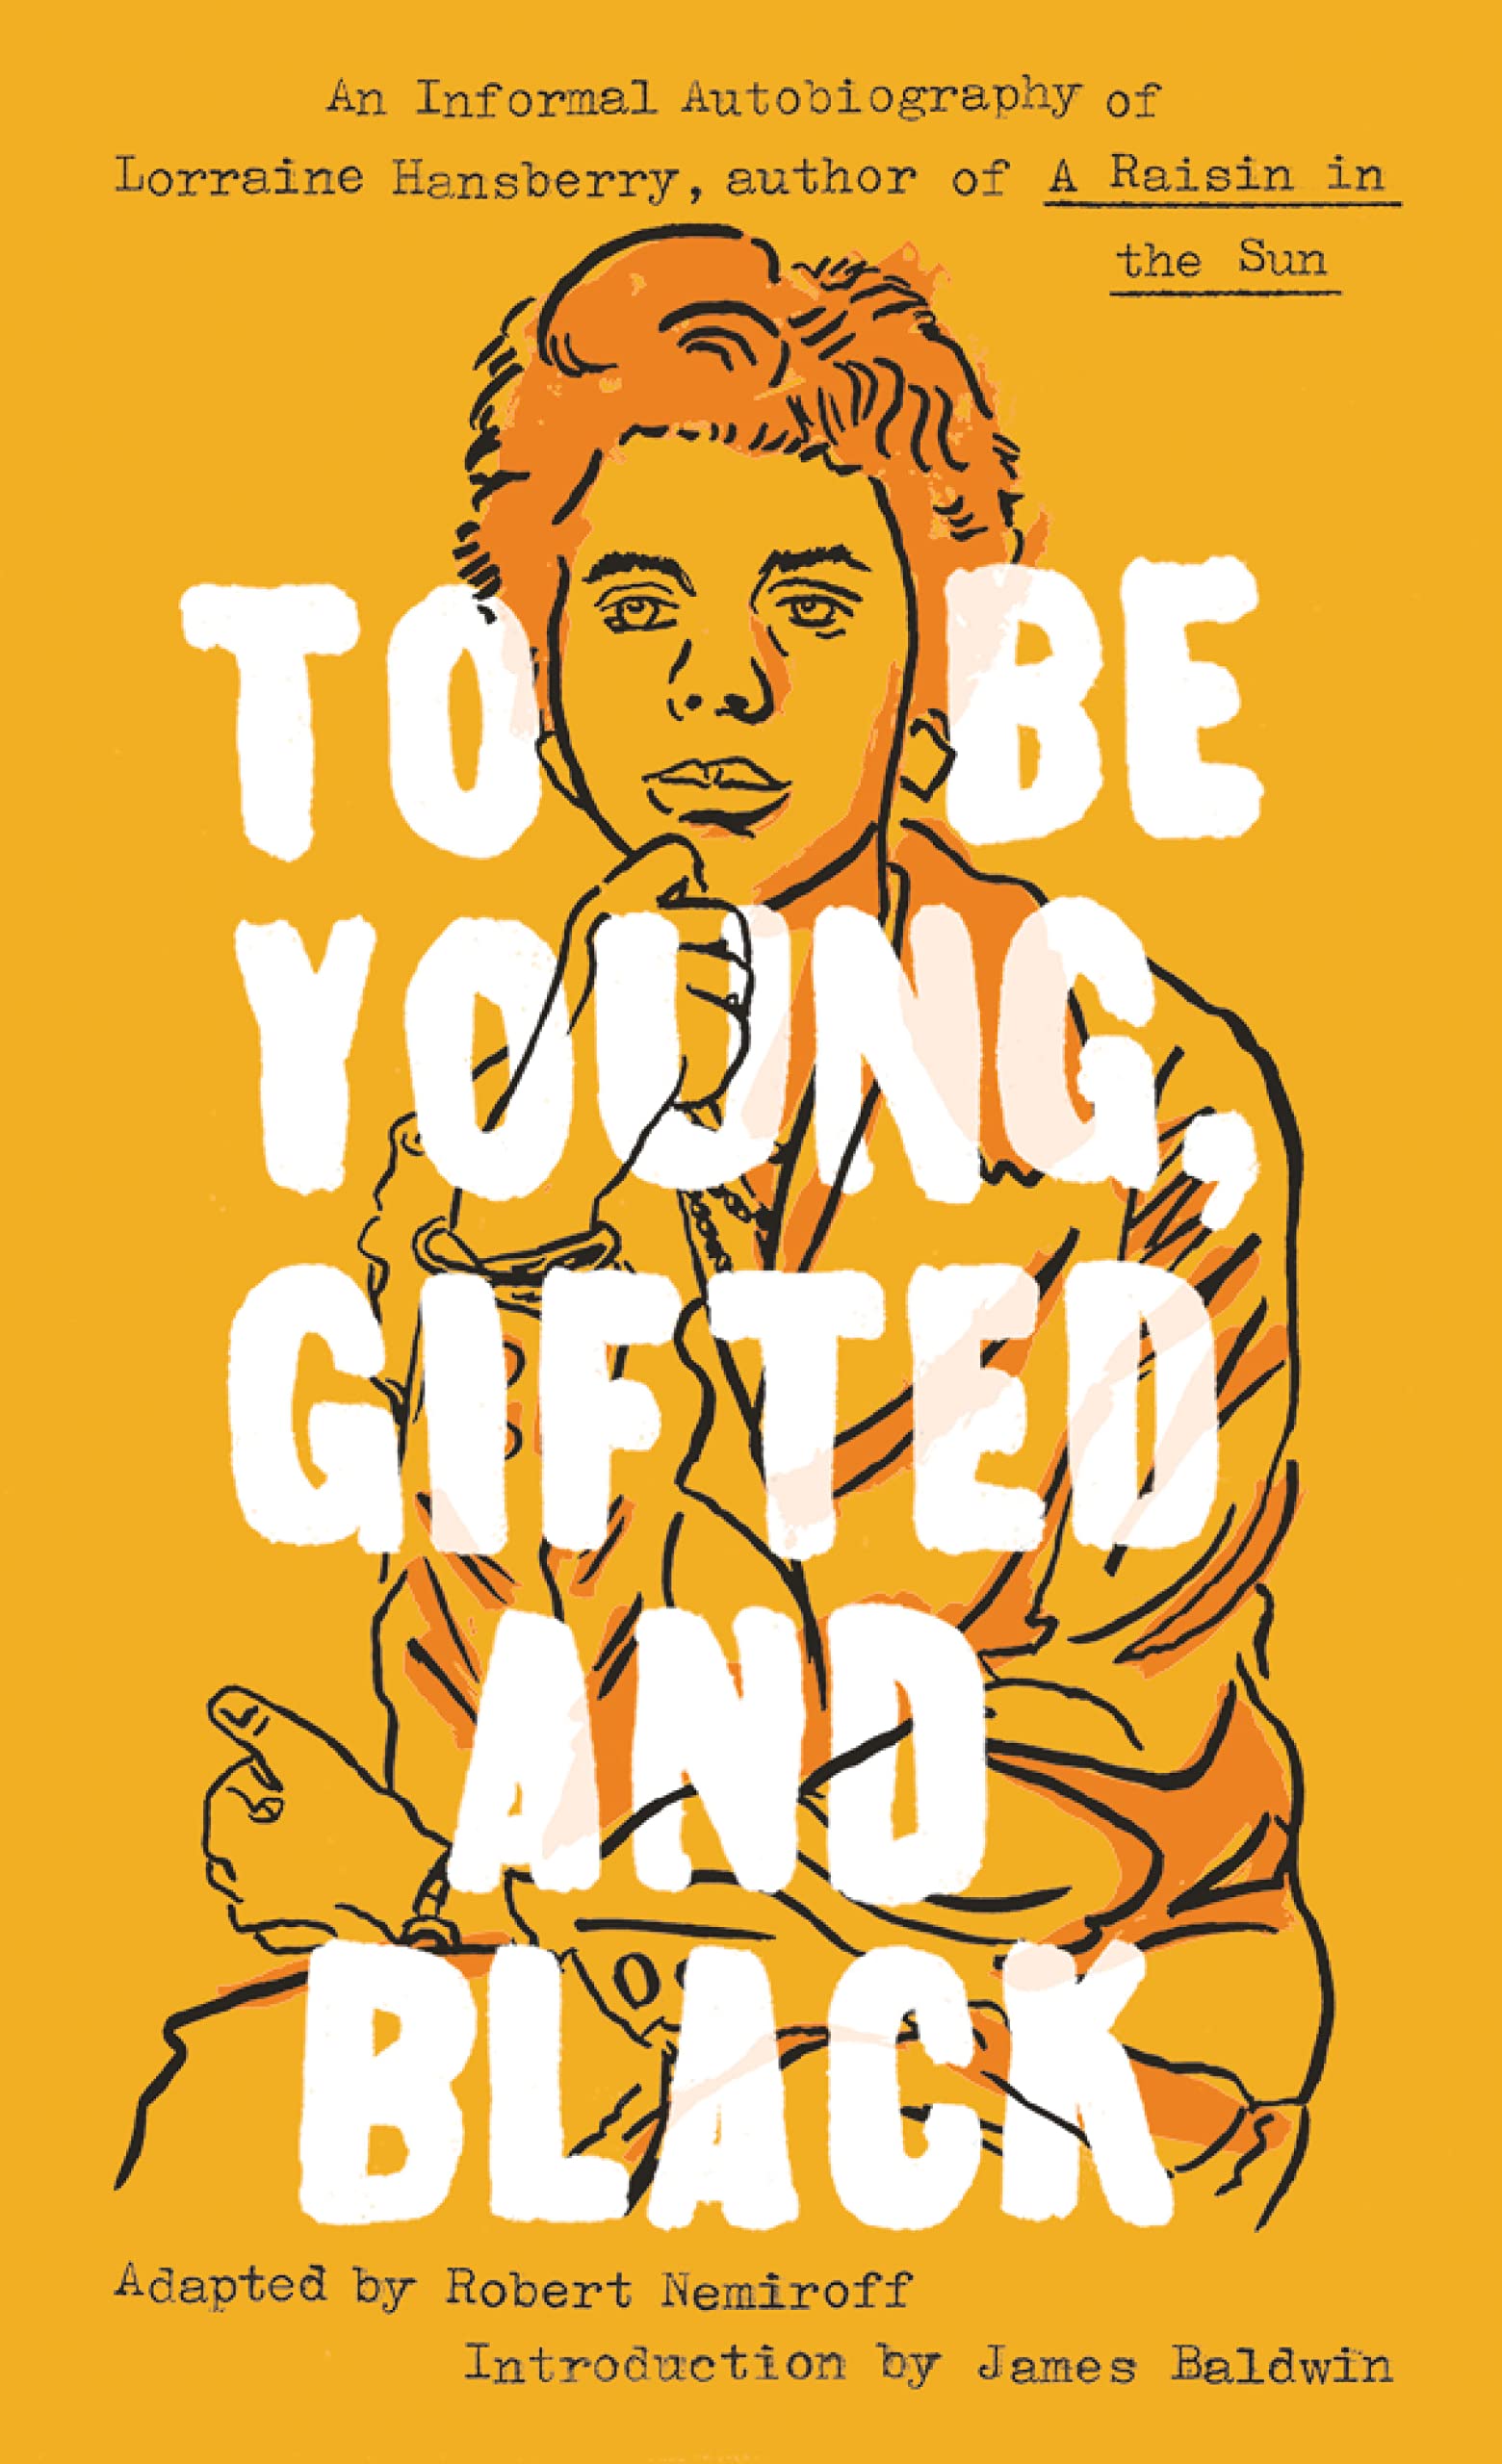 To Be Young, Gifted and Black (Signet Classics)